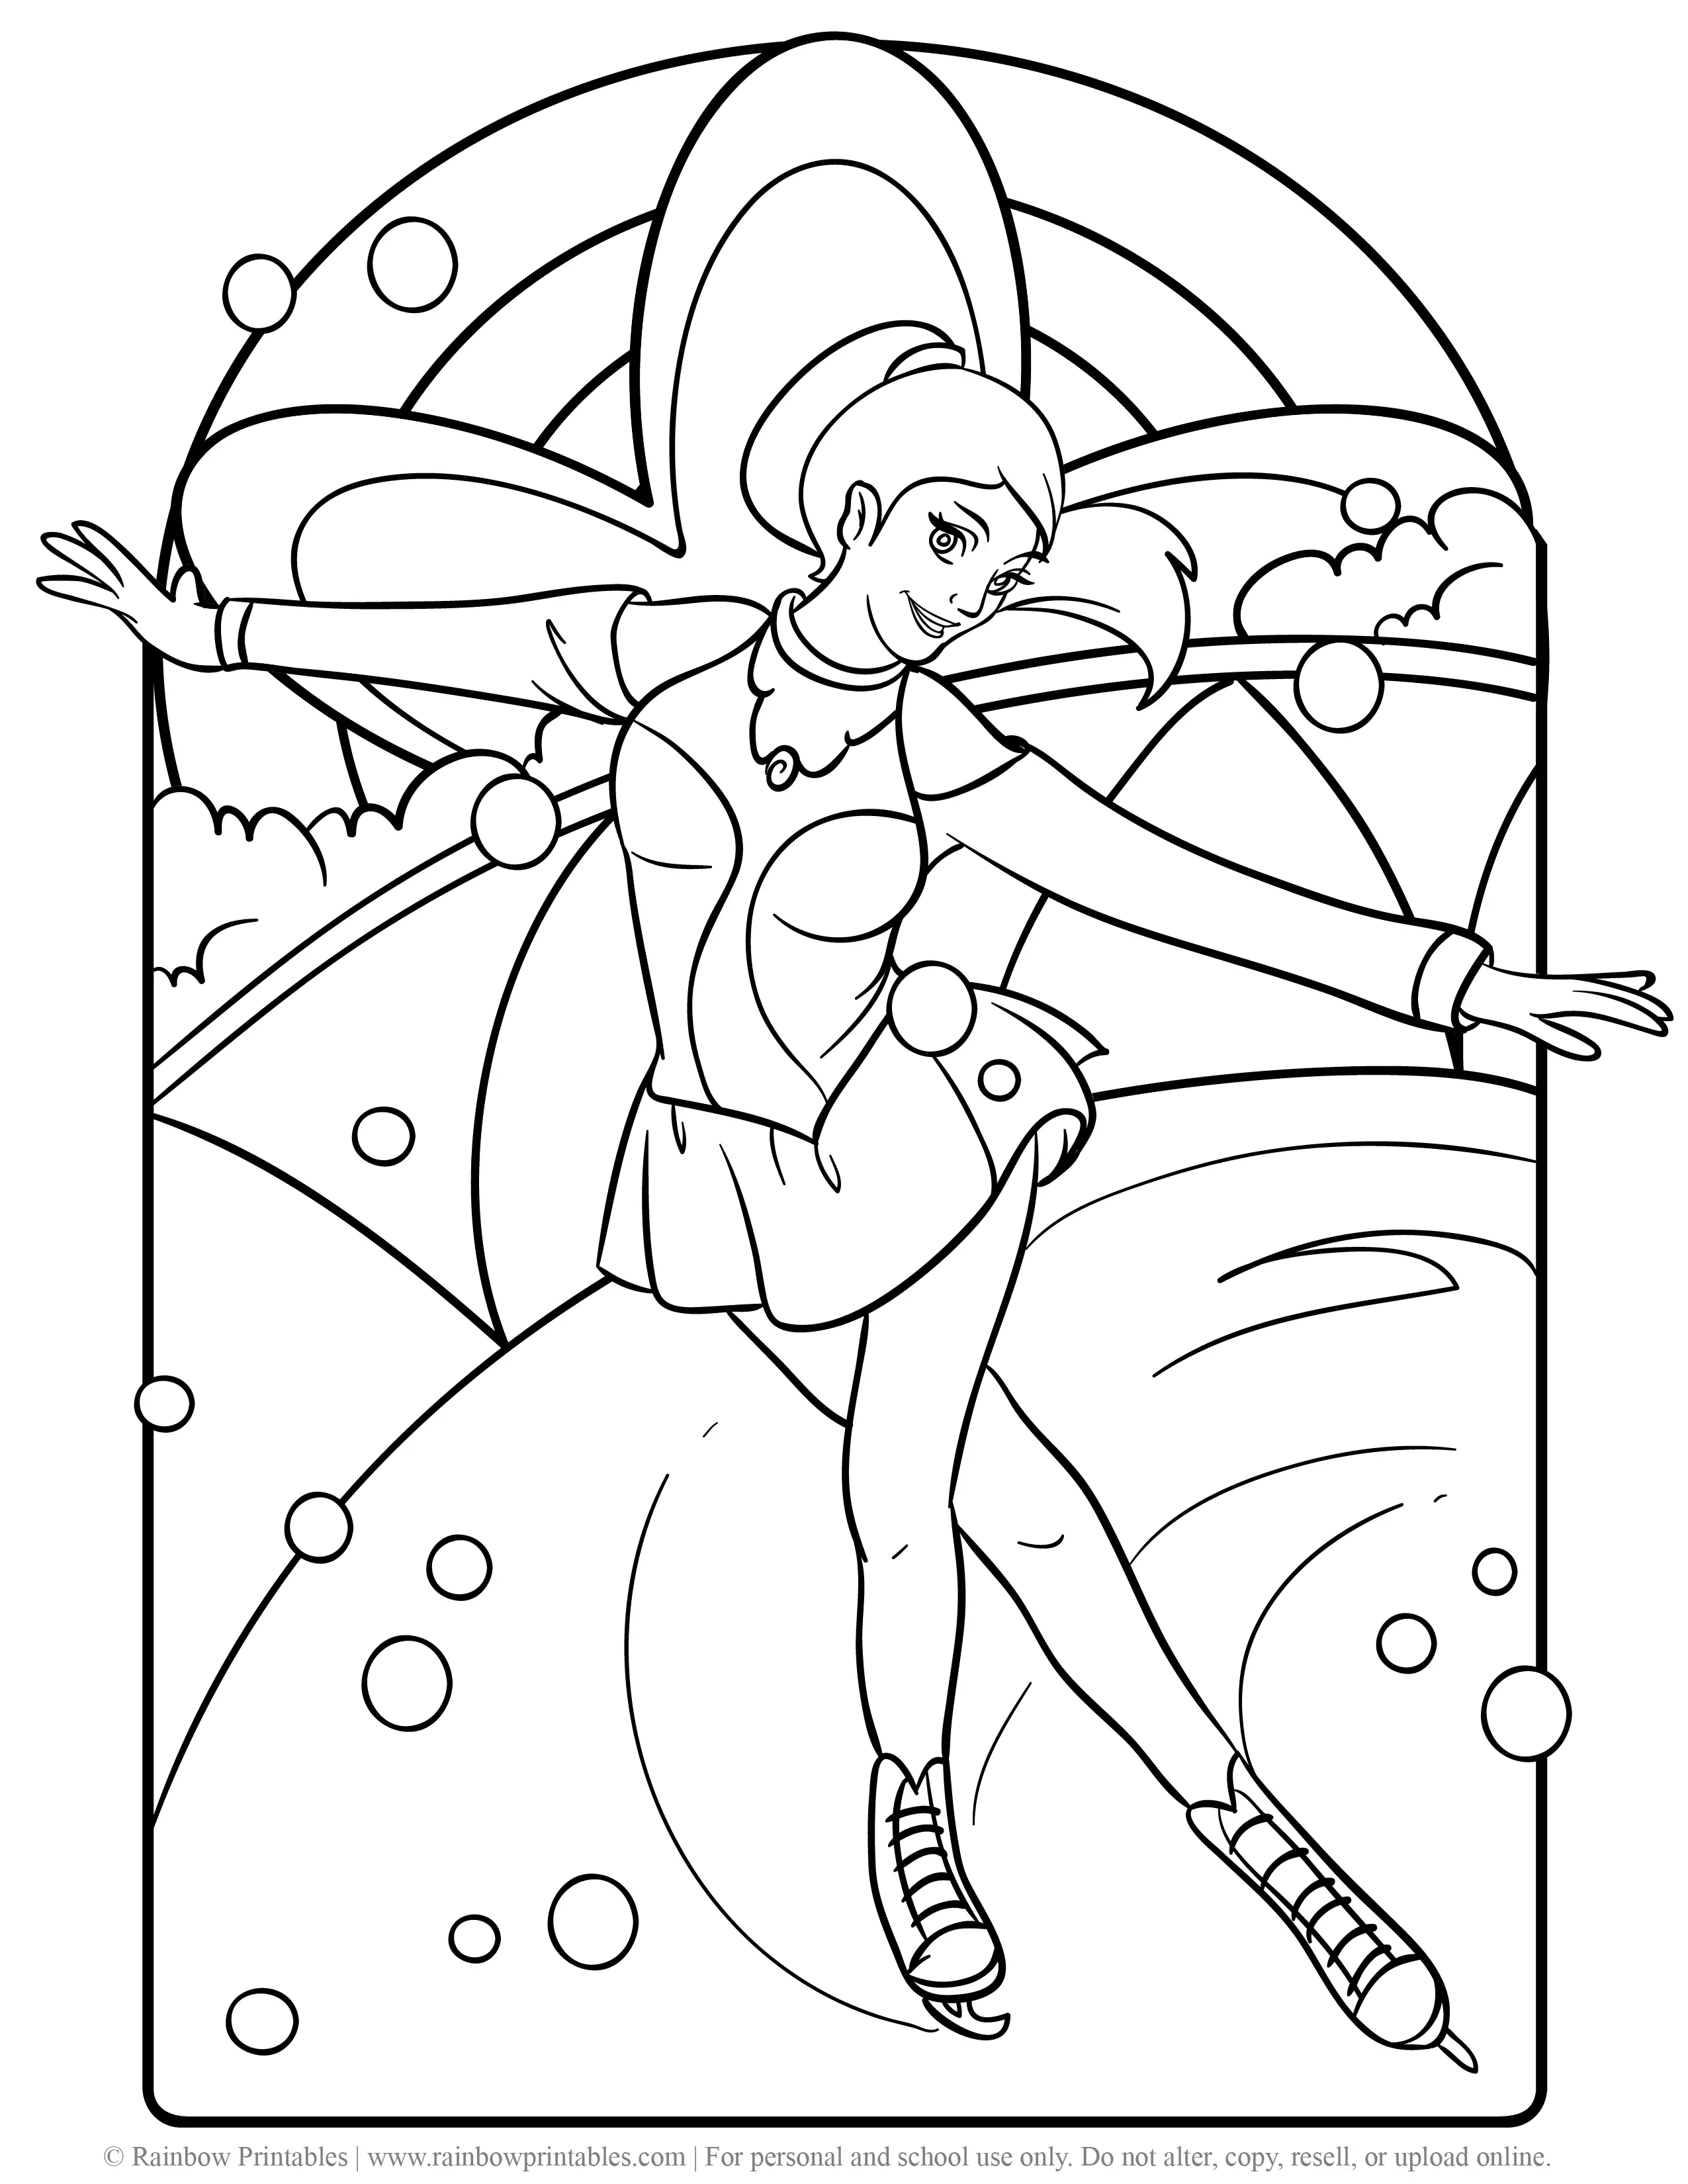 Free Coloring Pages for Kids Drawing Activities Line Art Illustration FIGURE SKATER GIRL ICE SKATE WINTER SPORT